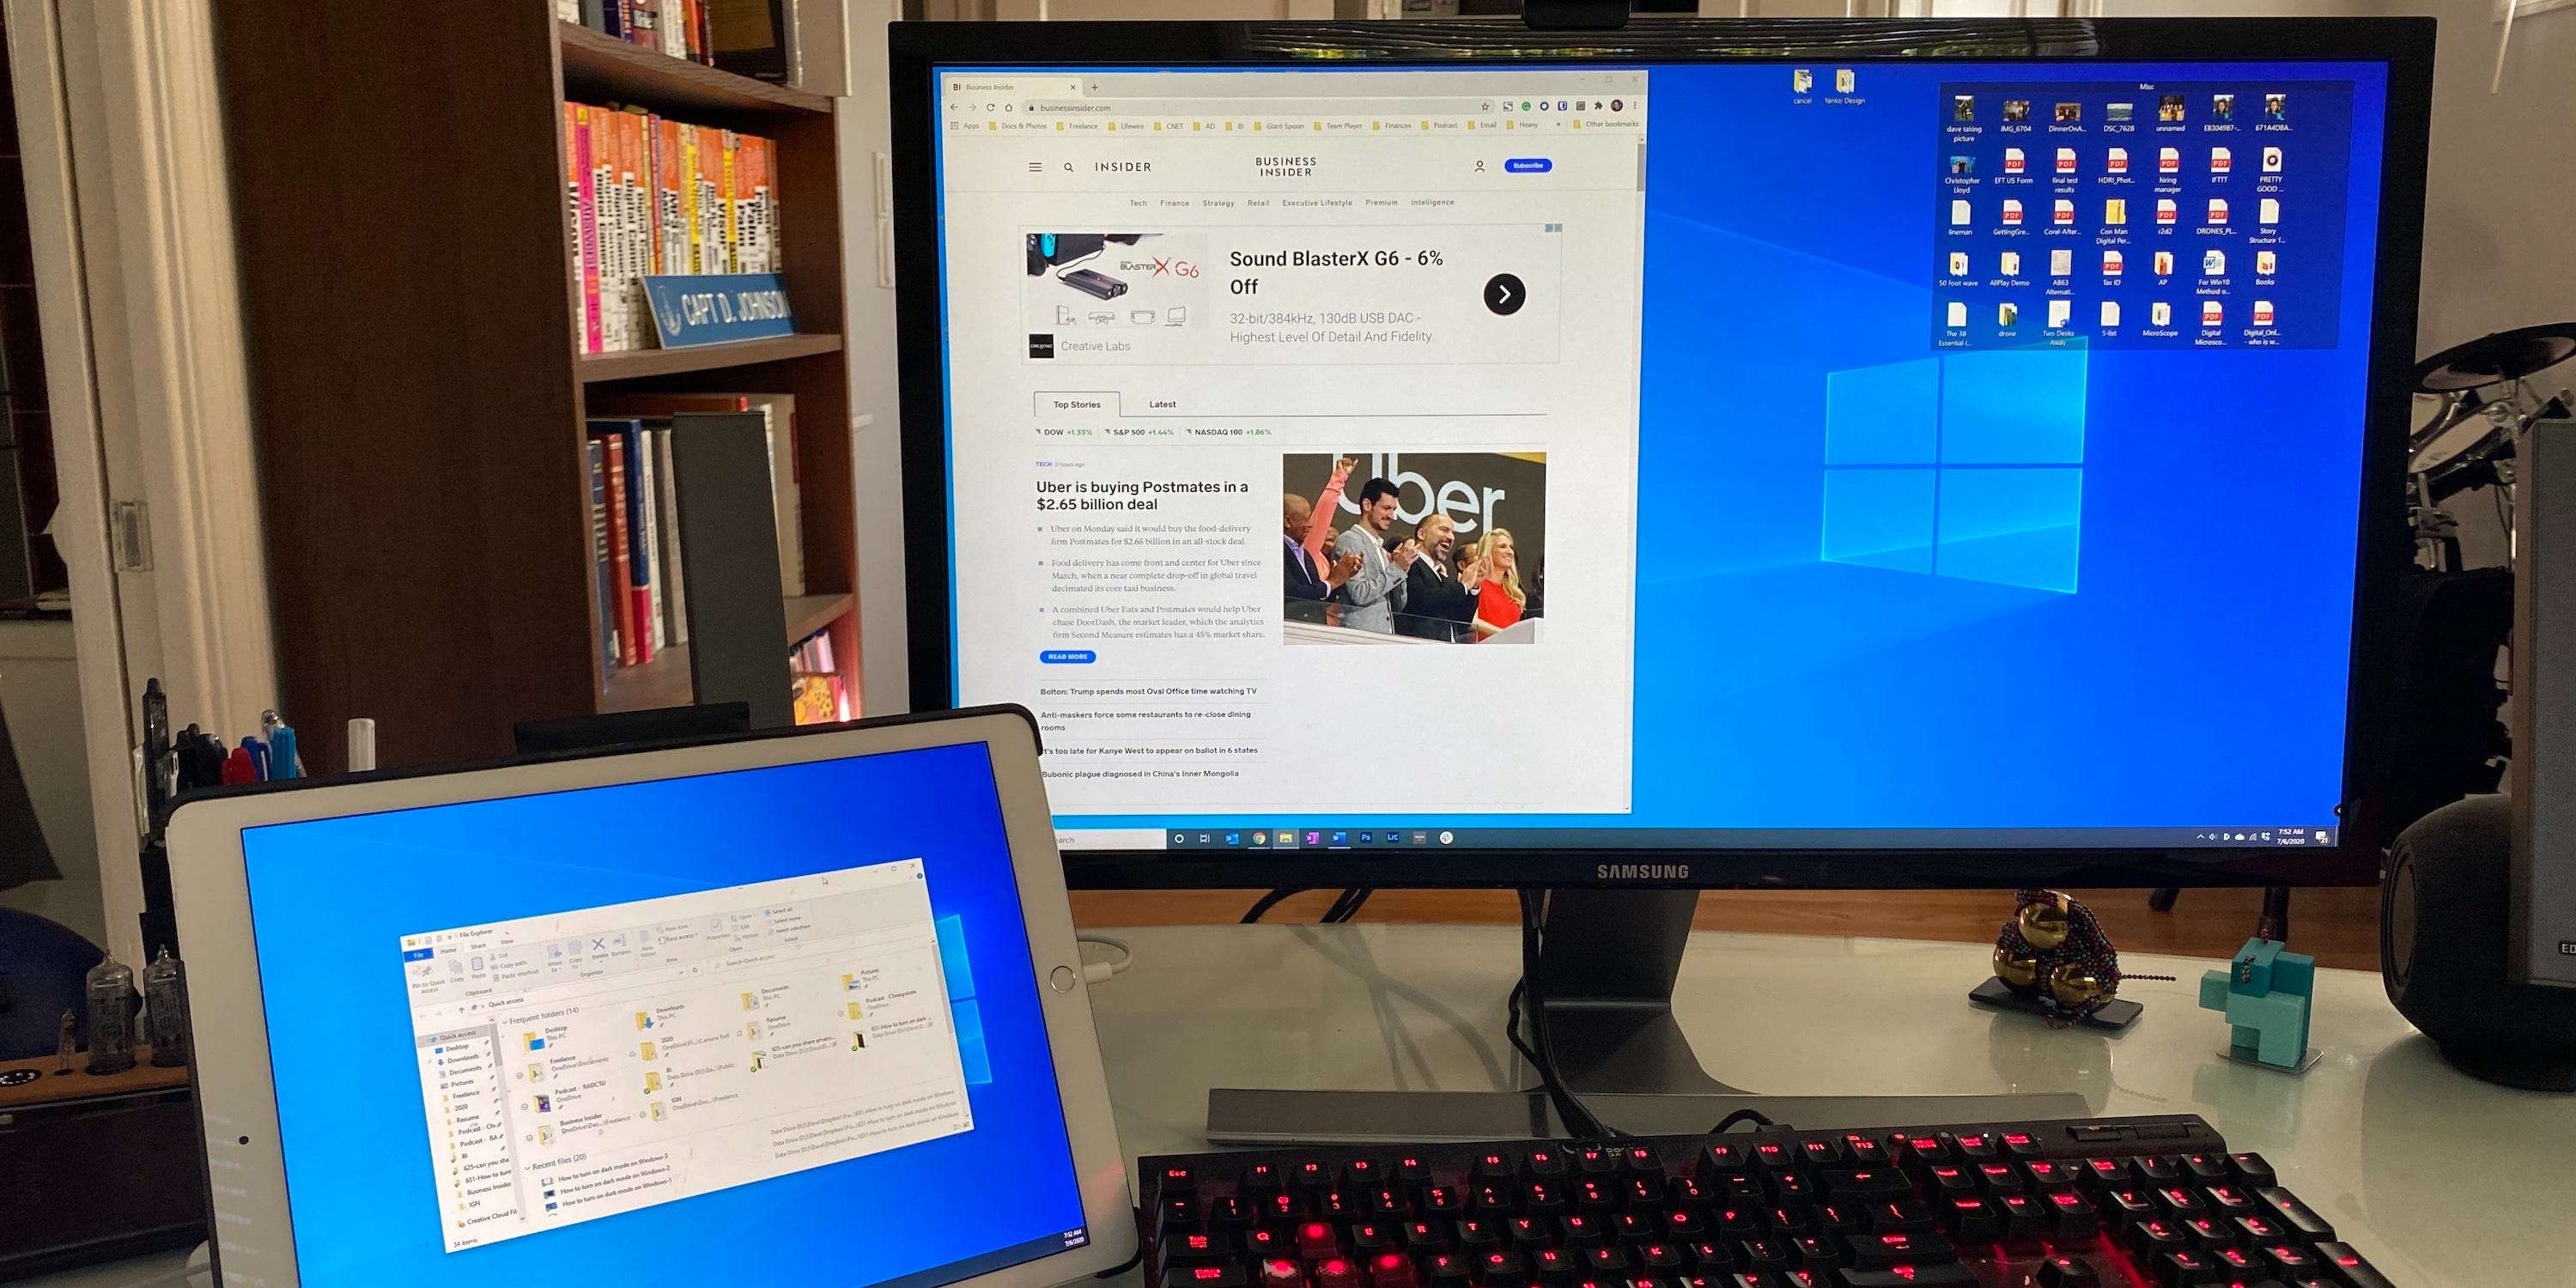 How to use your iPad as a second monitor for your Windows